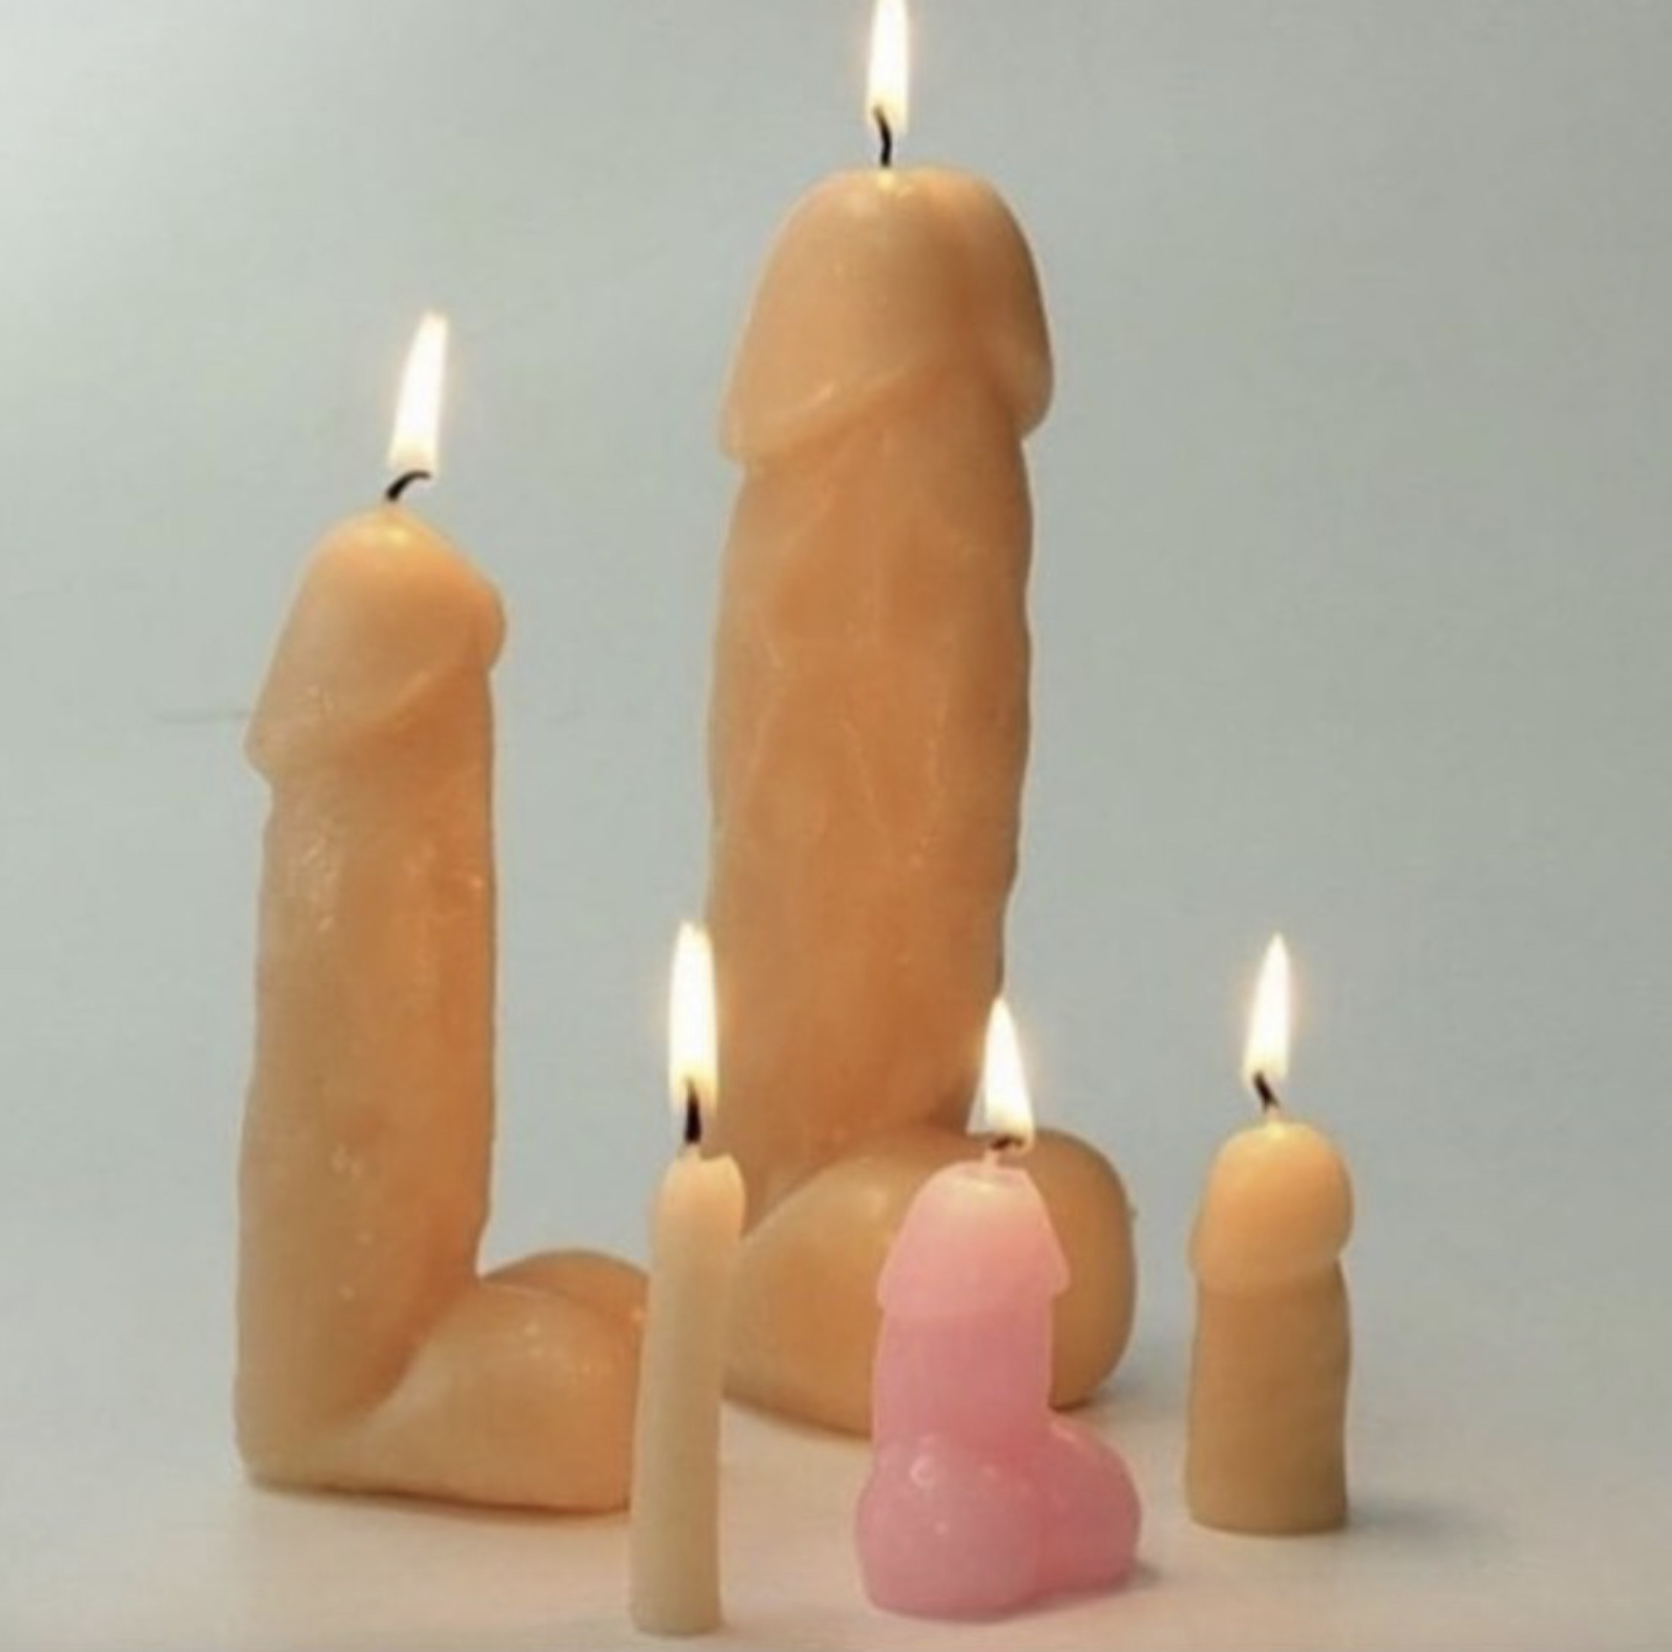 Anal Candle.